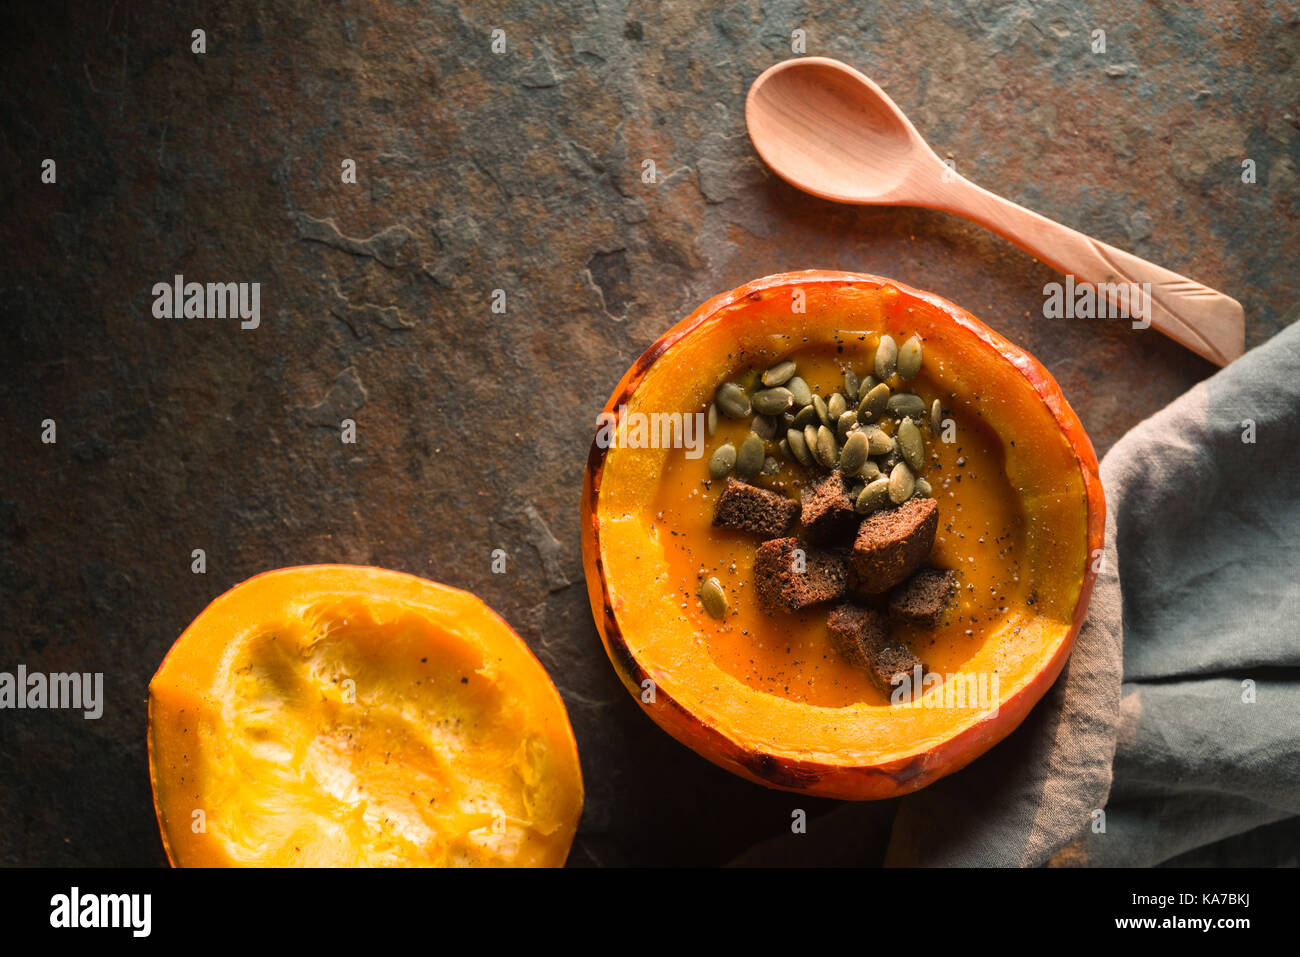 Pumpkin soup with seeds and croutons in pumpkin, napkin and spoon horizontal Stock Photo